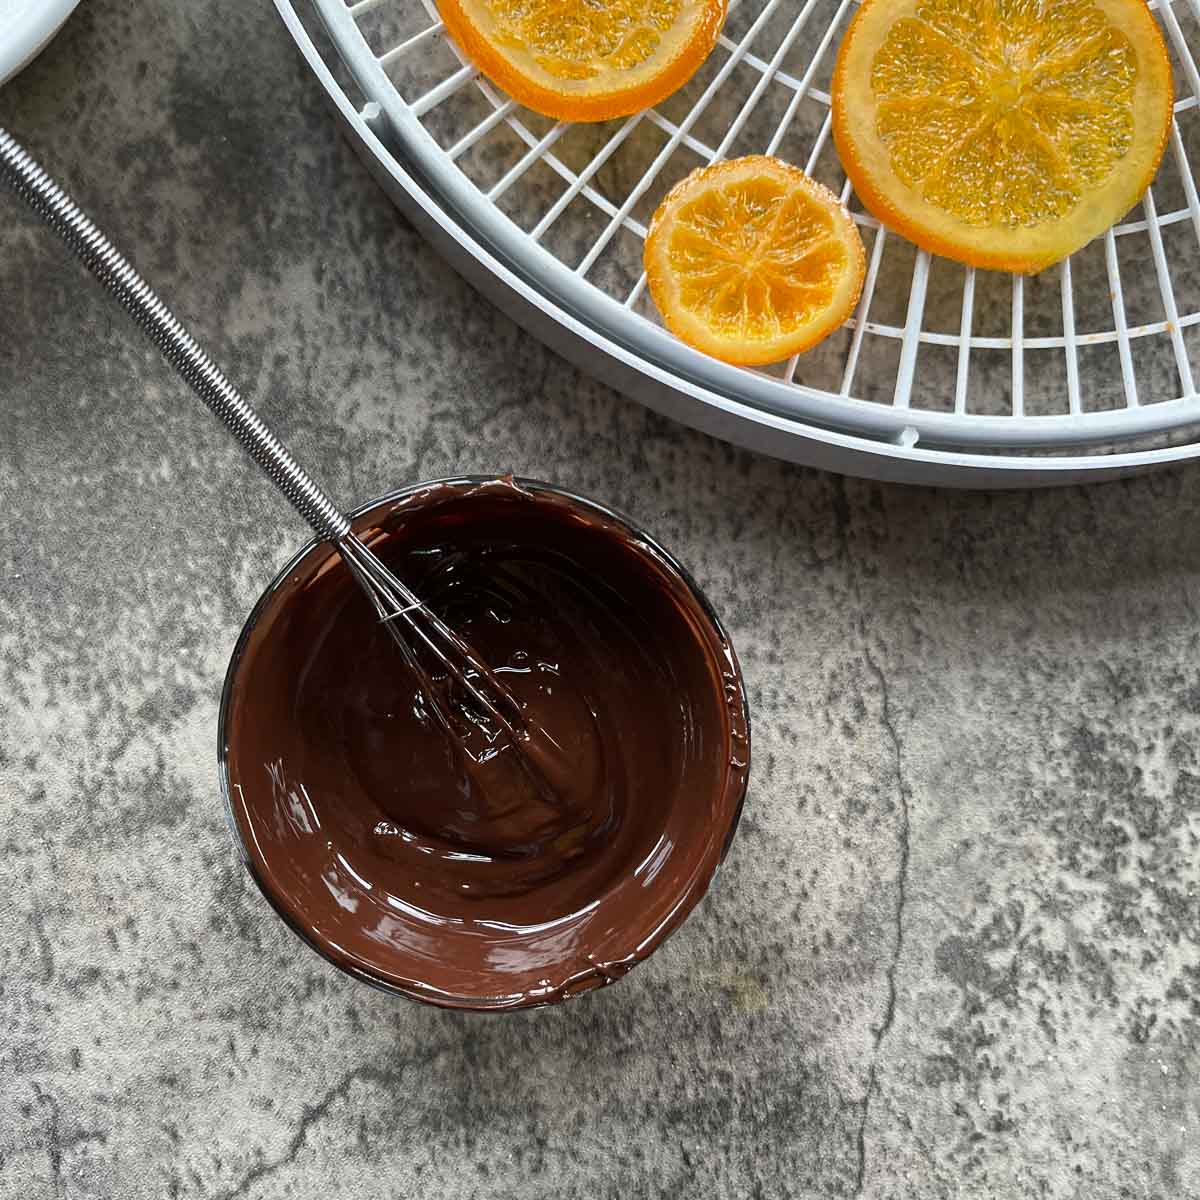 candied orange slices on a dehydrator with melted chocolate in a small bowl